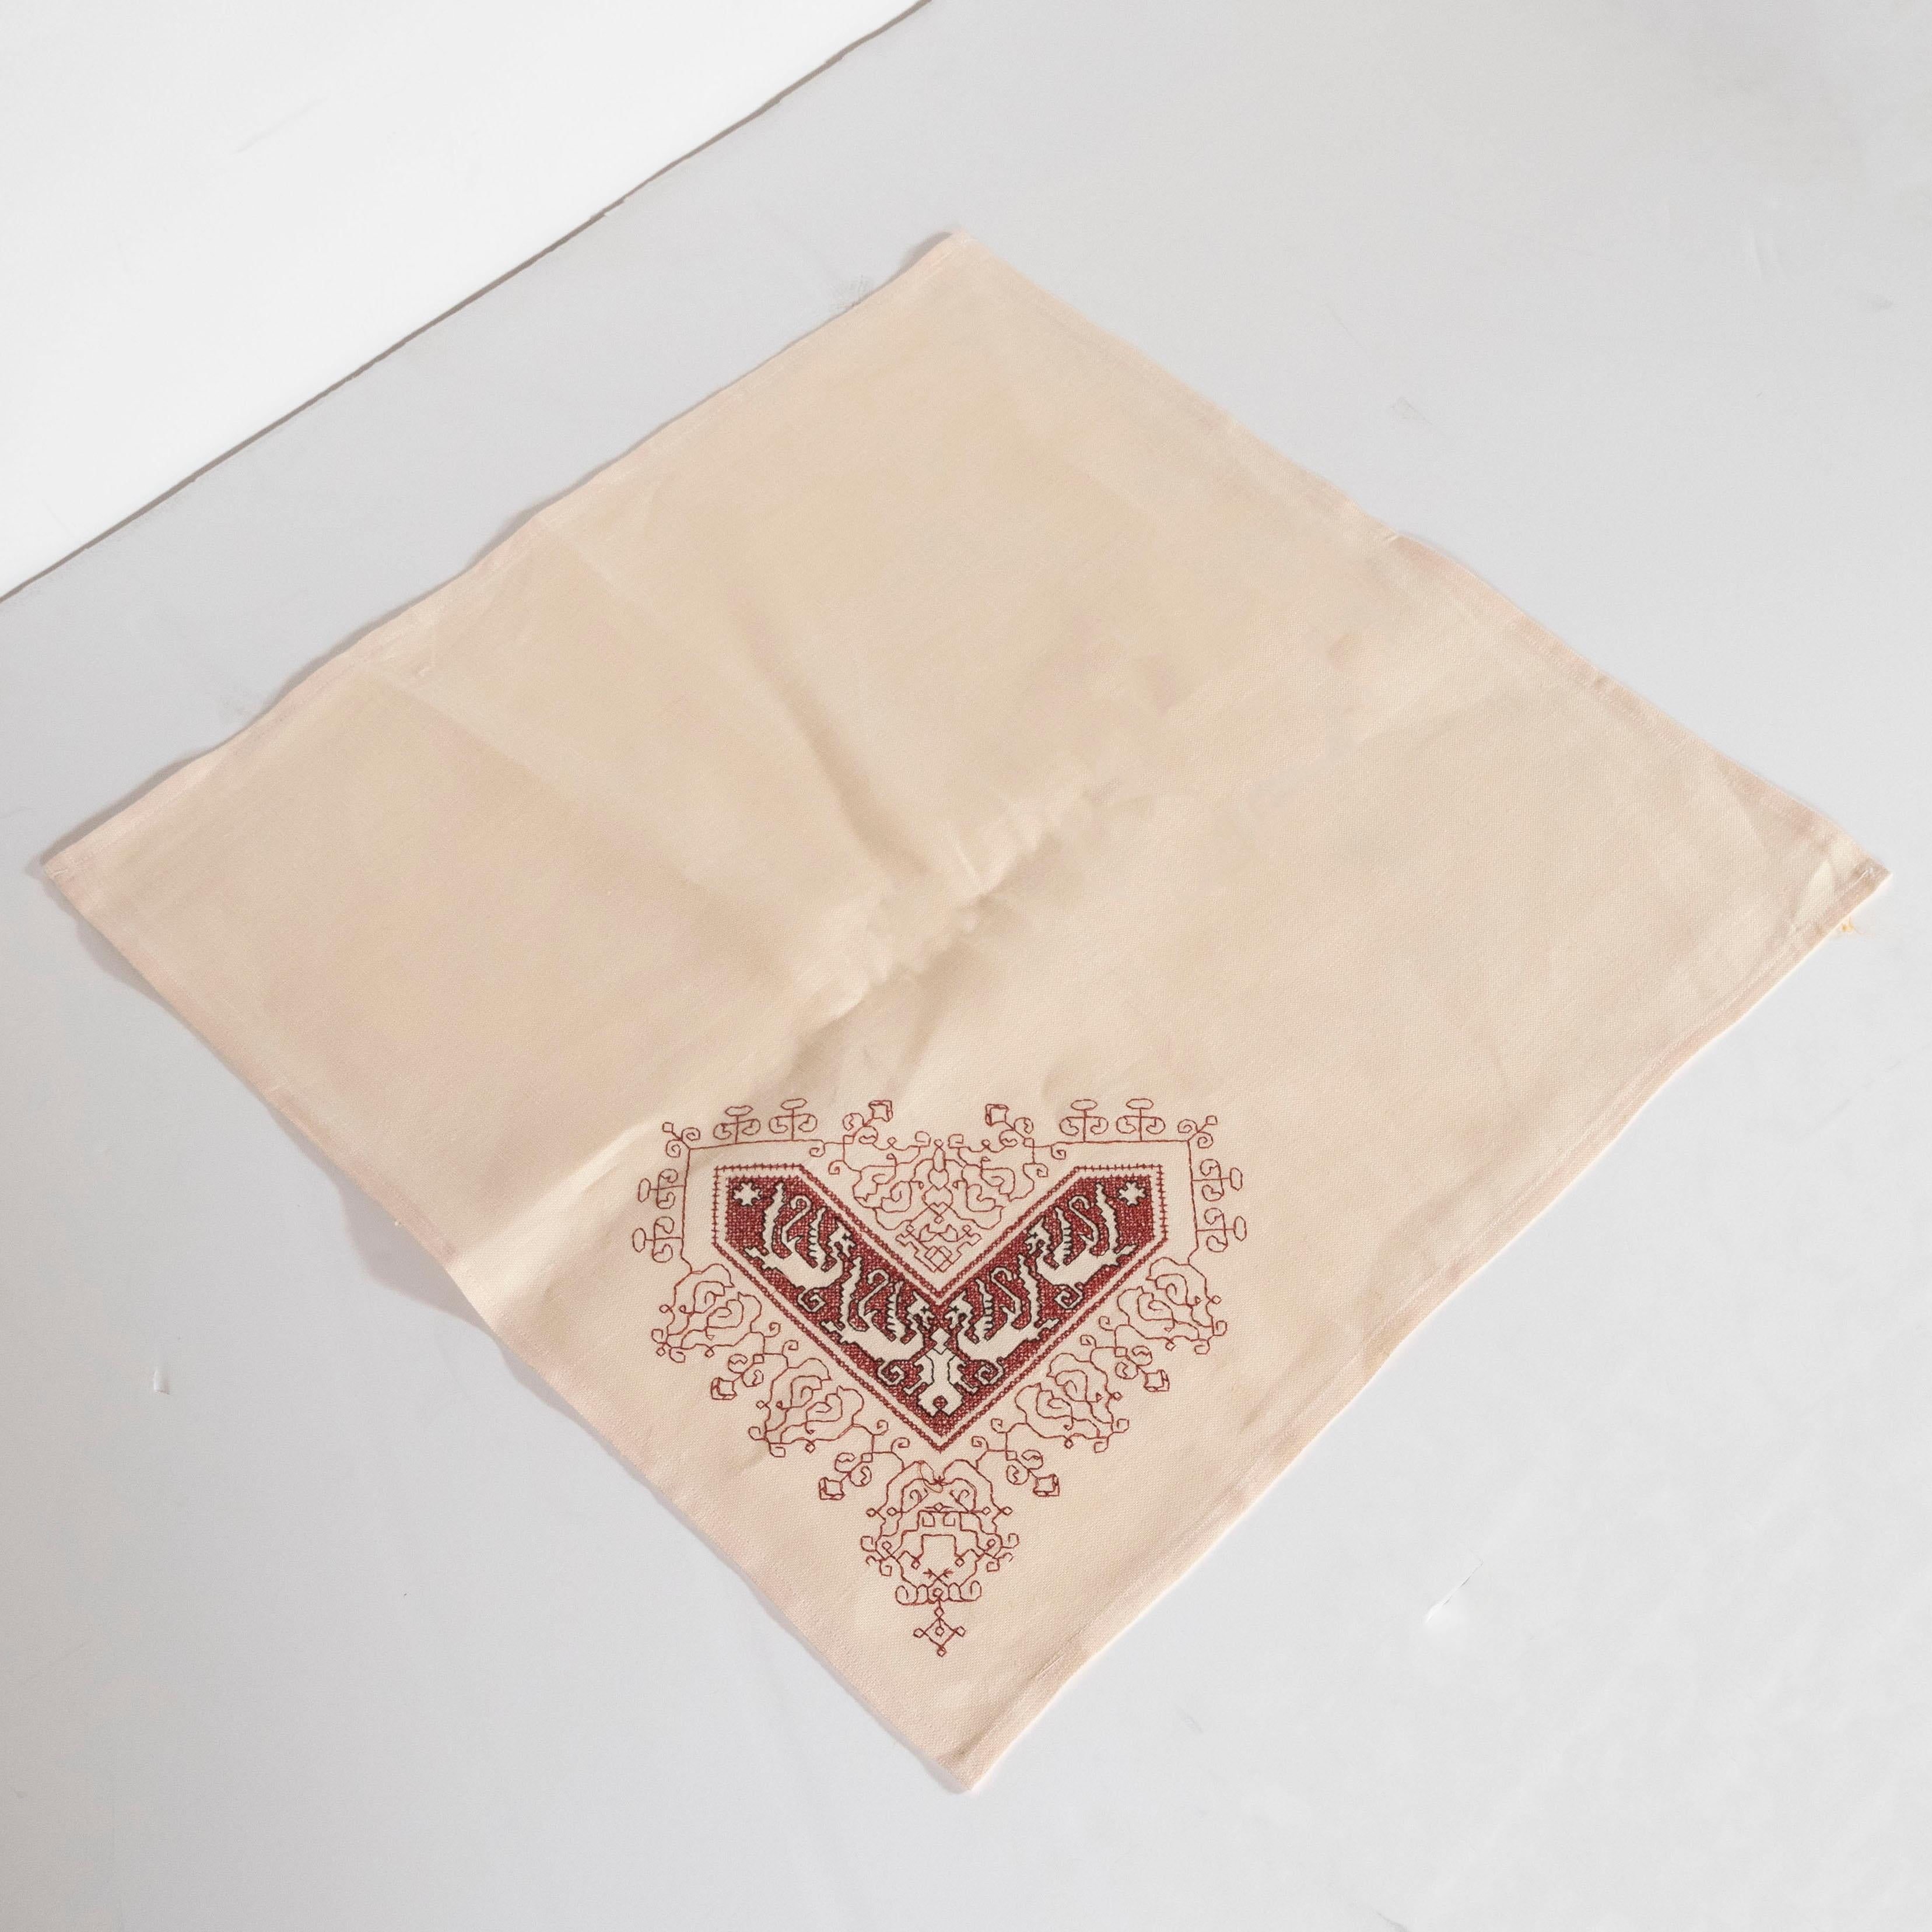 This beautiful set of twelve napkins were realized in Morocco in Northern Africa. They feature hand embroidery in pale crimson with black accents depicting stylized gargoyles, suggesting dragons, on ecru linen. Elegant, casual and beautifully